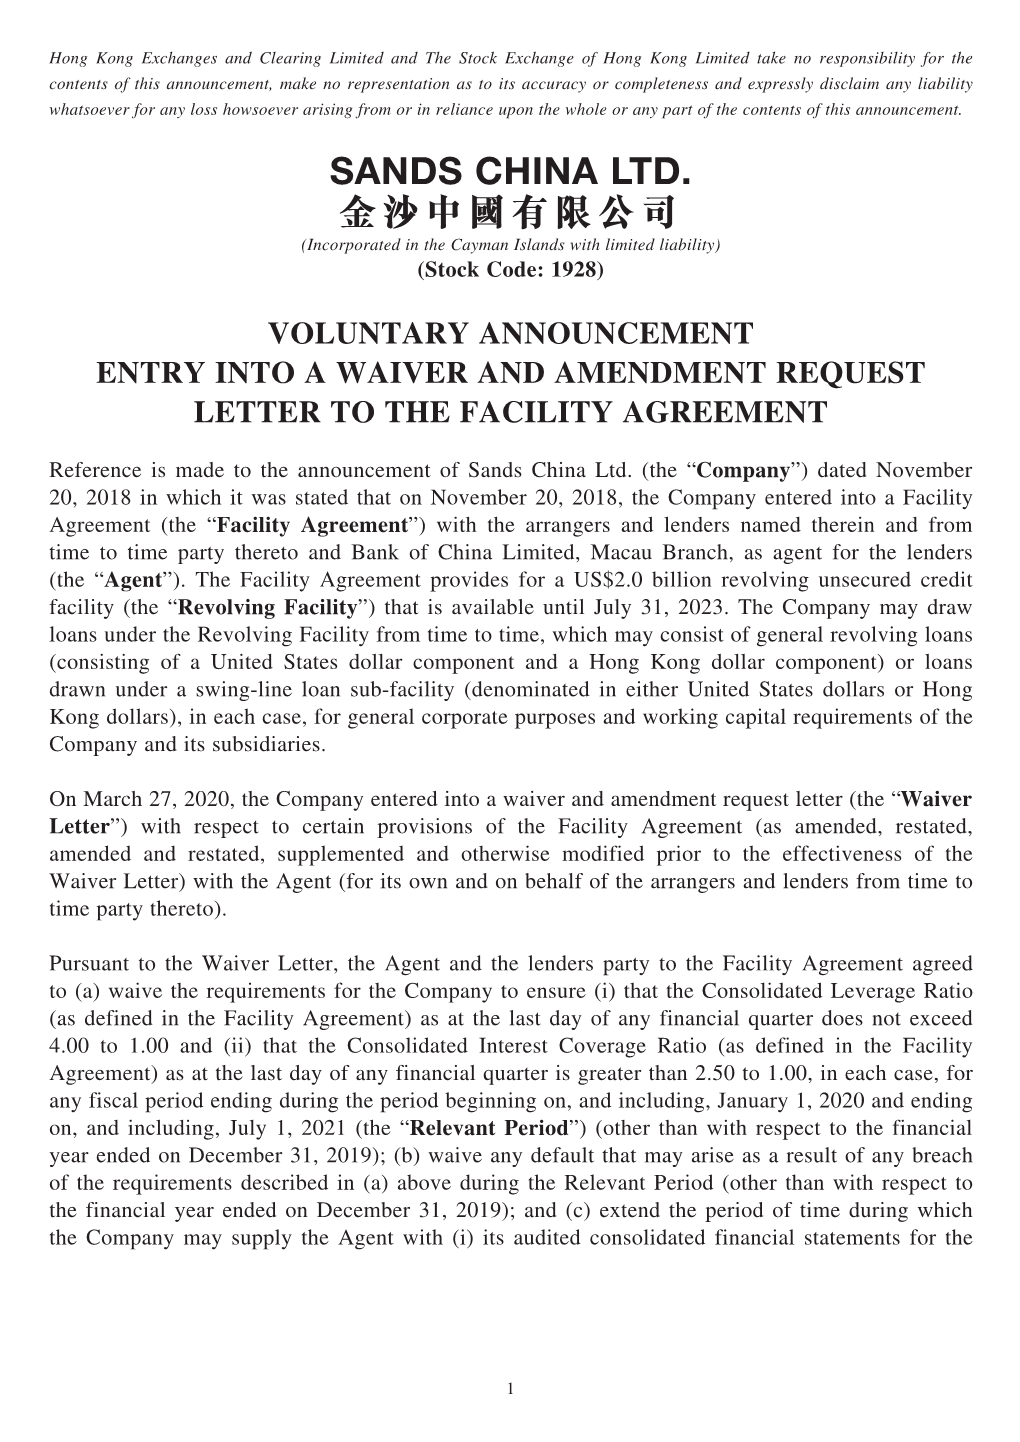 Voluntary Announcement Entry Into a Waiver and Amendment Request Letter to the Facility Agreement